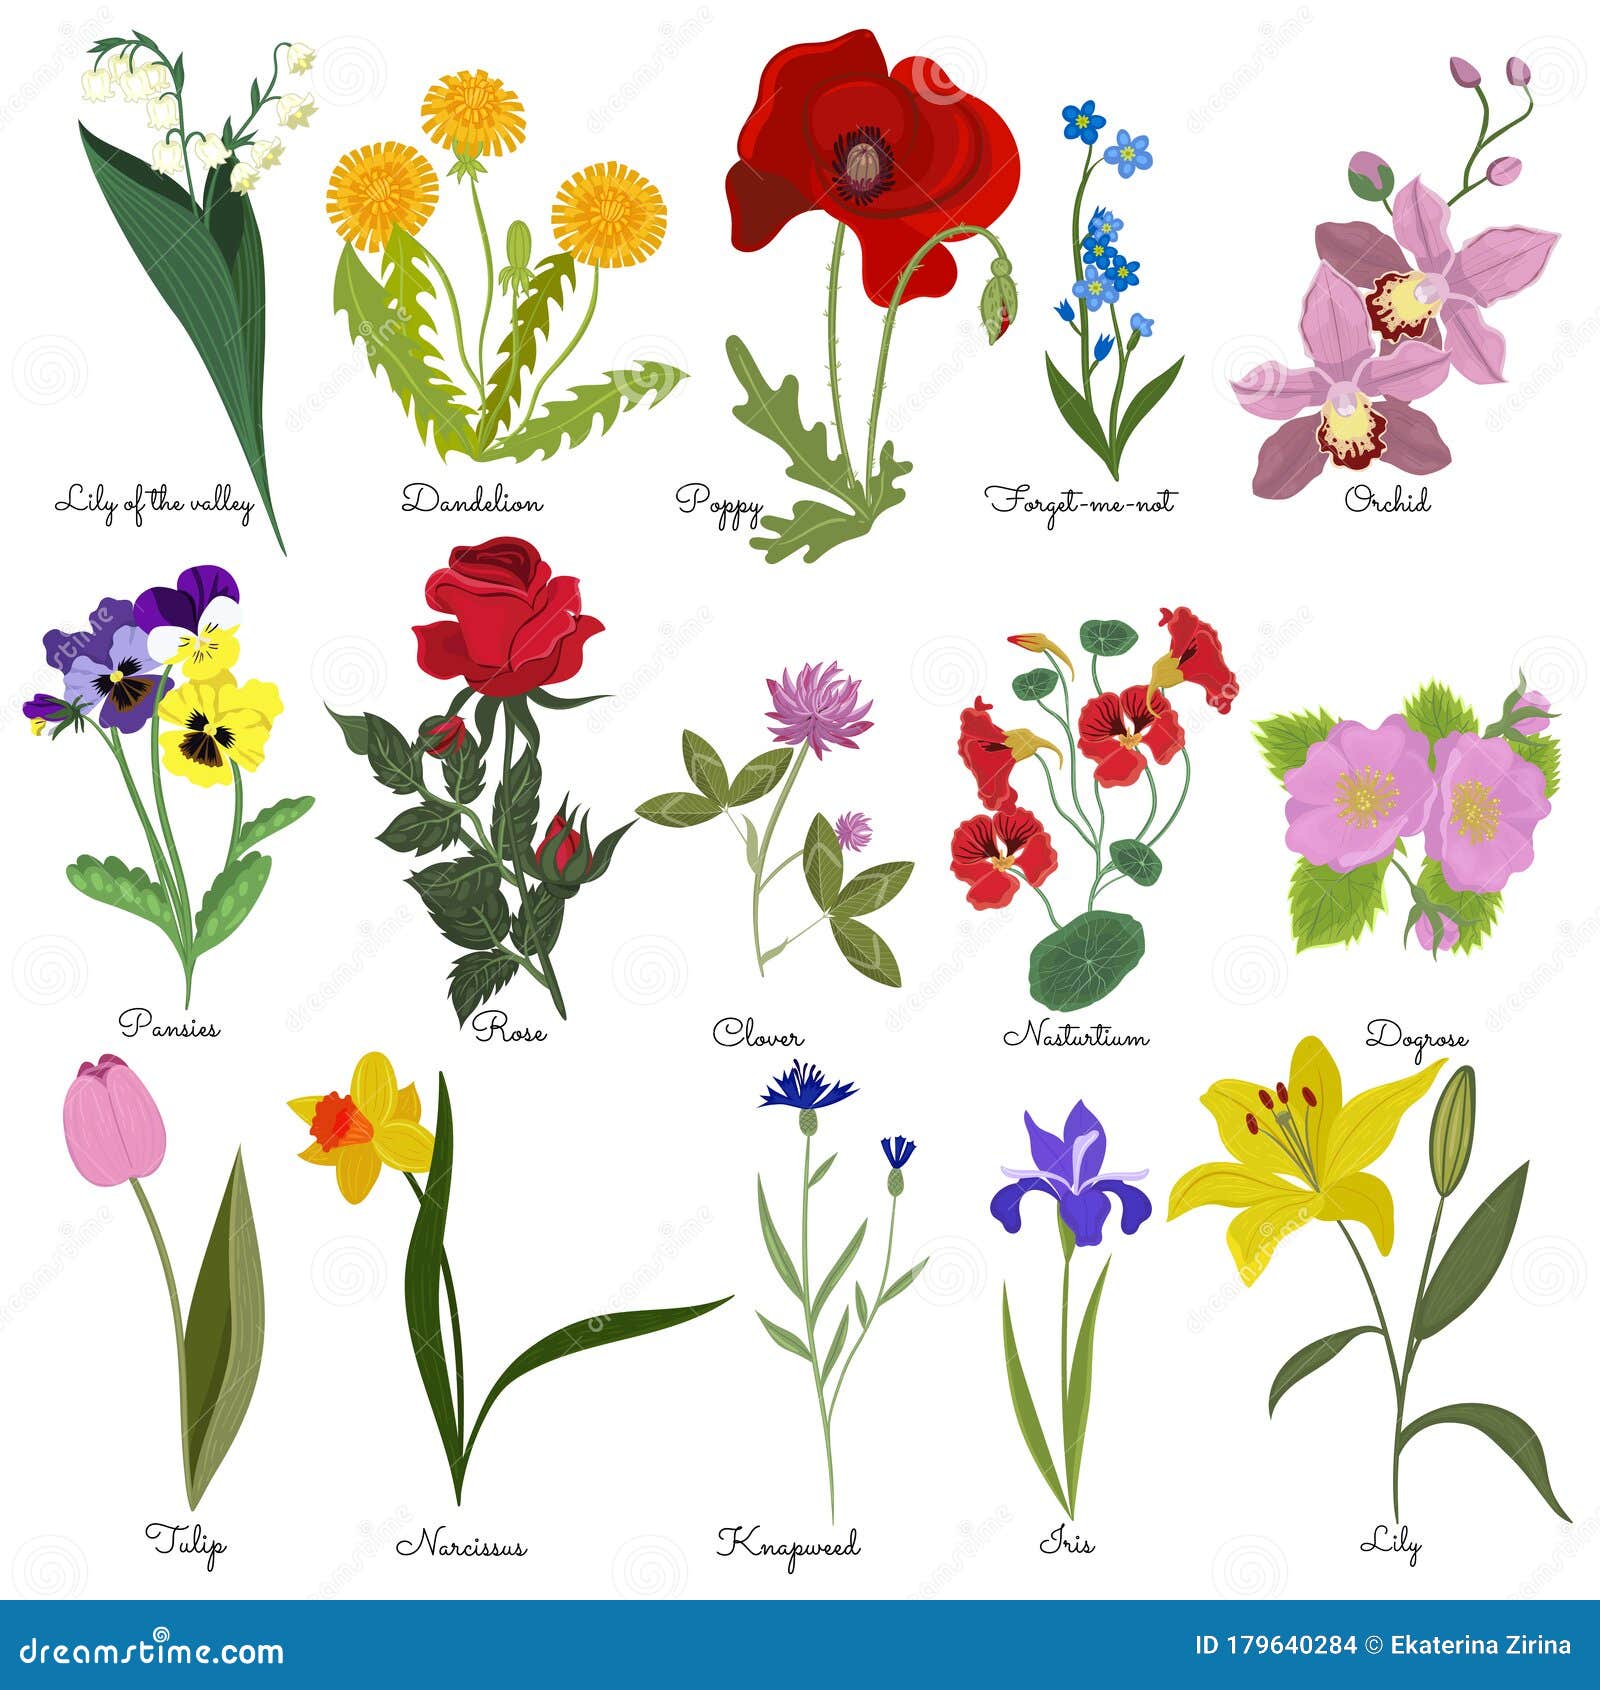 Flowers Name : List Of Flower Names For Creativity : The world of ...